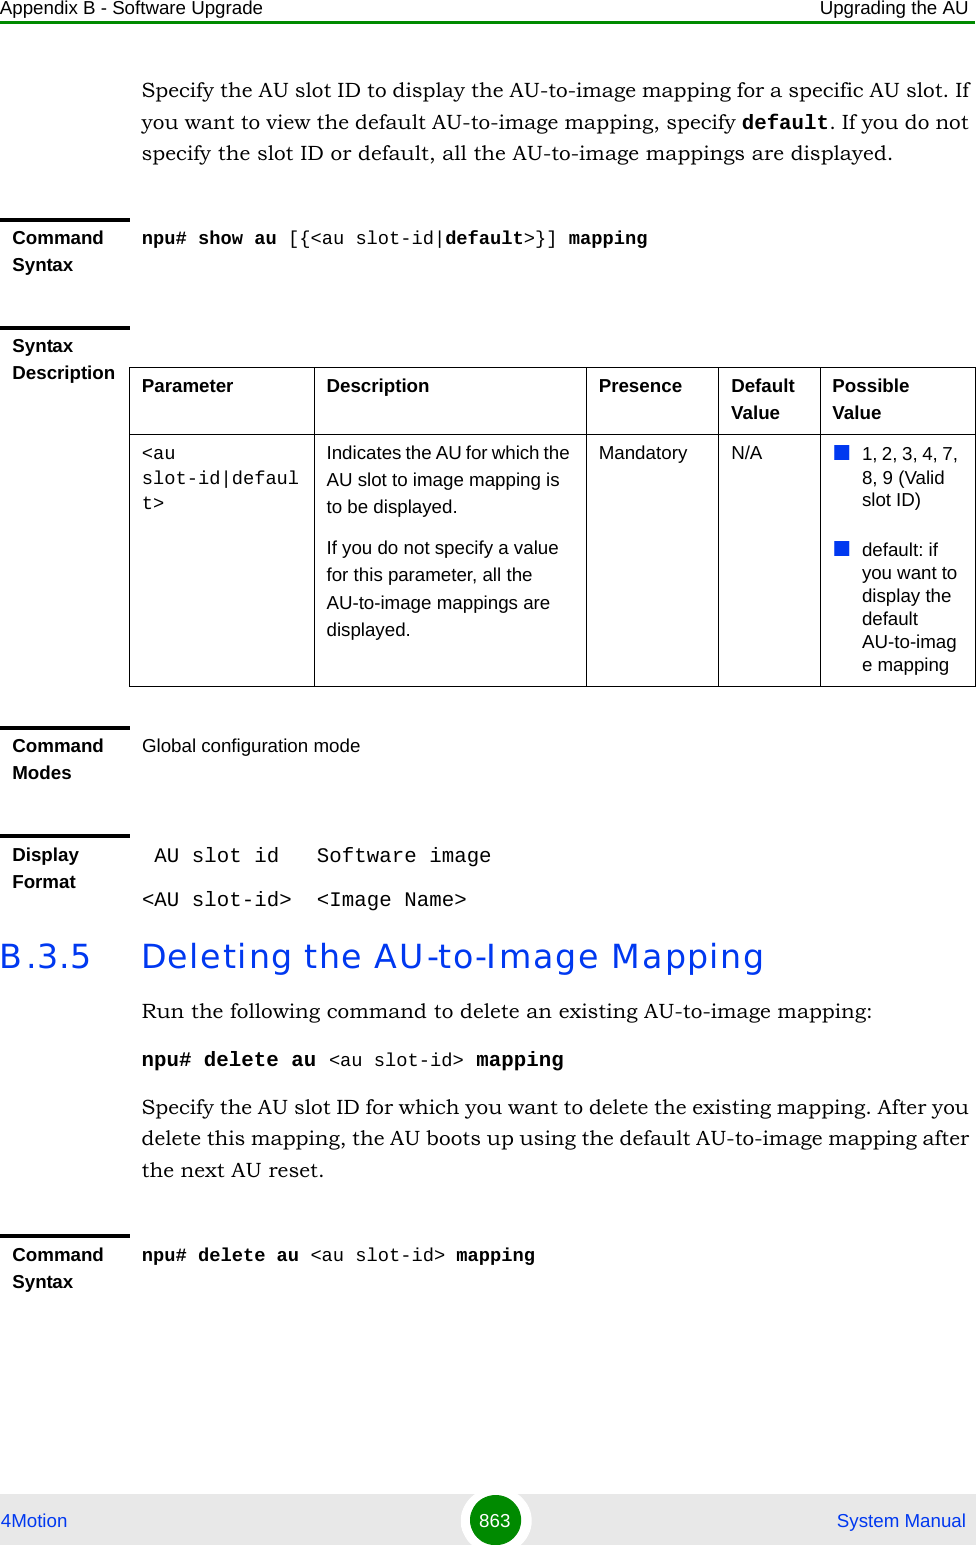 Appendix B - Software Upgrade Upgrading the AU4Motion 863  System ManualSpecify the AU slot ID to display the AU-to-image mapping for a specific AU slot. If you want to view the default AU-to-image mapping, specify default. If you do not specify the slot ID or default, all the AU-to-image mappings are displayed.B.3.5 Deleting the AU-to-Image MappingRun the following command to delete an existing AU-to-image mapping:npu# delete au &lt;au slot-id&gt; mappingSpecify the AU slot ID for which you want to delete the existing mapping. After you delete this mapping, the AU boots up using the default AU-to-image mapping after the next AU reset.Command Syntaxnpu# show au [{&lt;au slot-id|default&gt;}] mappingSyntax Description Parameter Description Presence Default ValuePossible Value&lt;au slot-id|default&gt;Indicates the AU for which the AU slot to image mapping is to be displayed.If you do not specify a value for this parameter, all the AU-to-image mappings are displayed.Mandatory N/A 1, 2, 3, 4, 7, 8, 9 (Valid slot ID)default: if you want to display the default AU-to-image mappingCommand ModesGlobal configuration modeDisplay Format AU slot id   Software image&lt;AU slot-id&gt;  &lt;Image Name&gt;Command Syntaxnpu# delete au &lt;au slot-id&gt; mapping